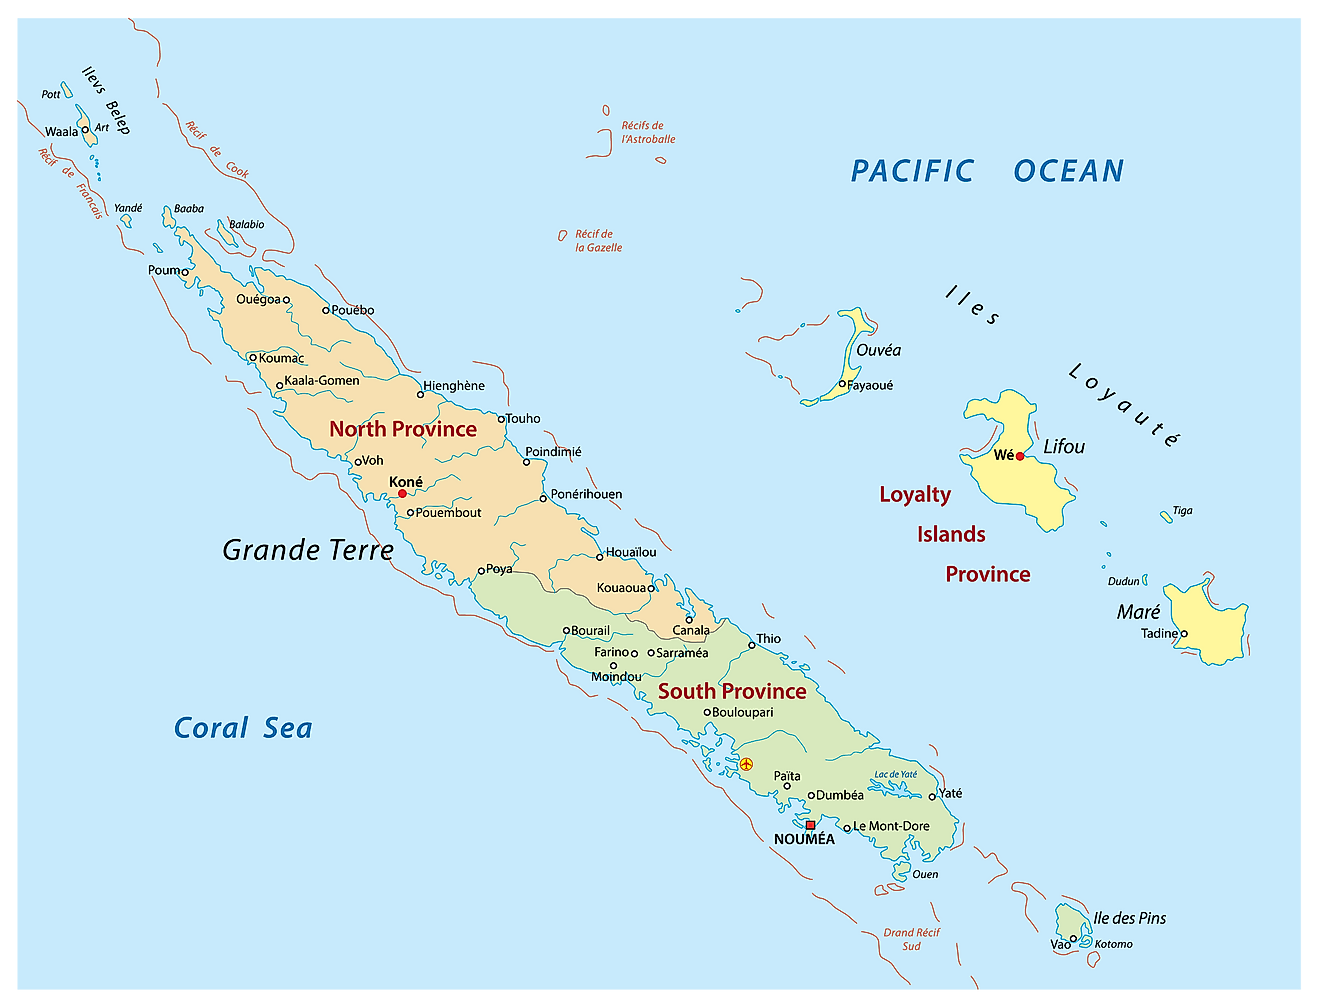 Political Map of New Caledonia showing its 3 provinces and the capital Nouméa